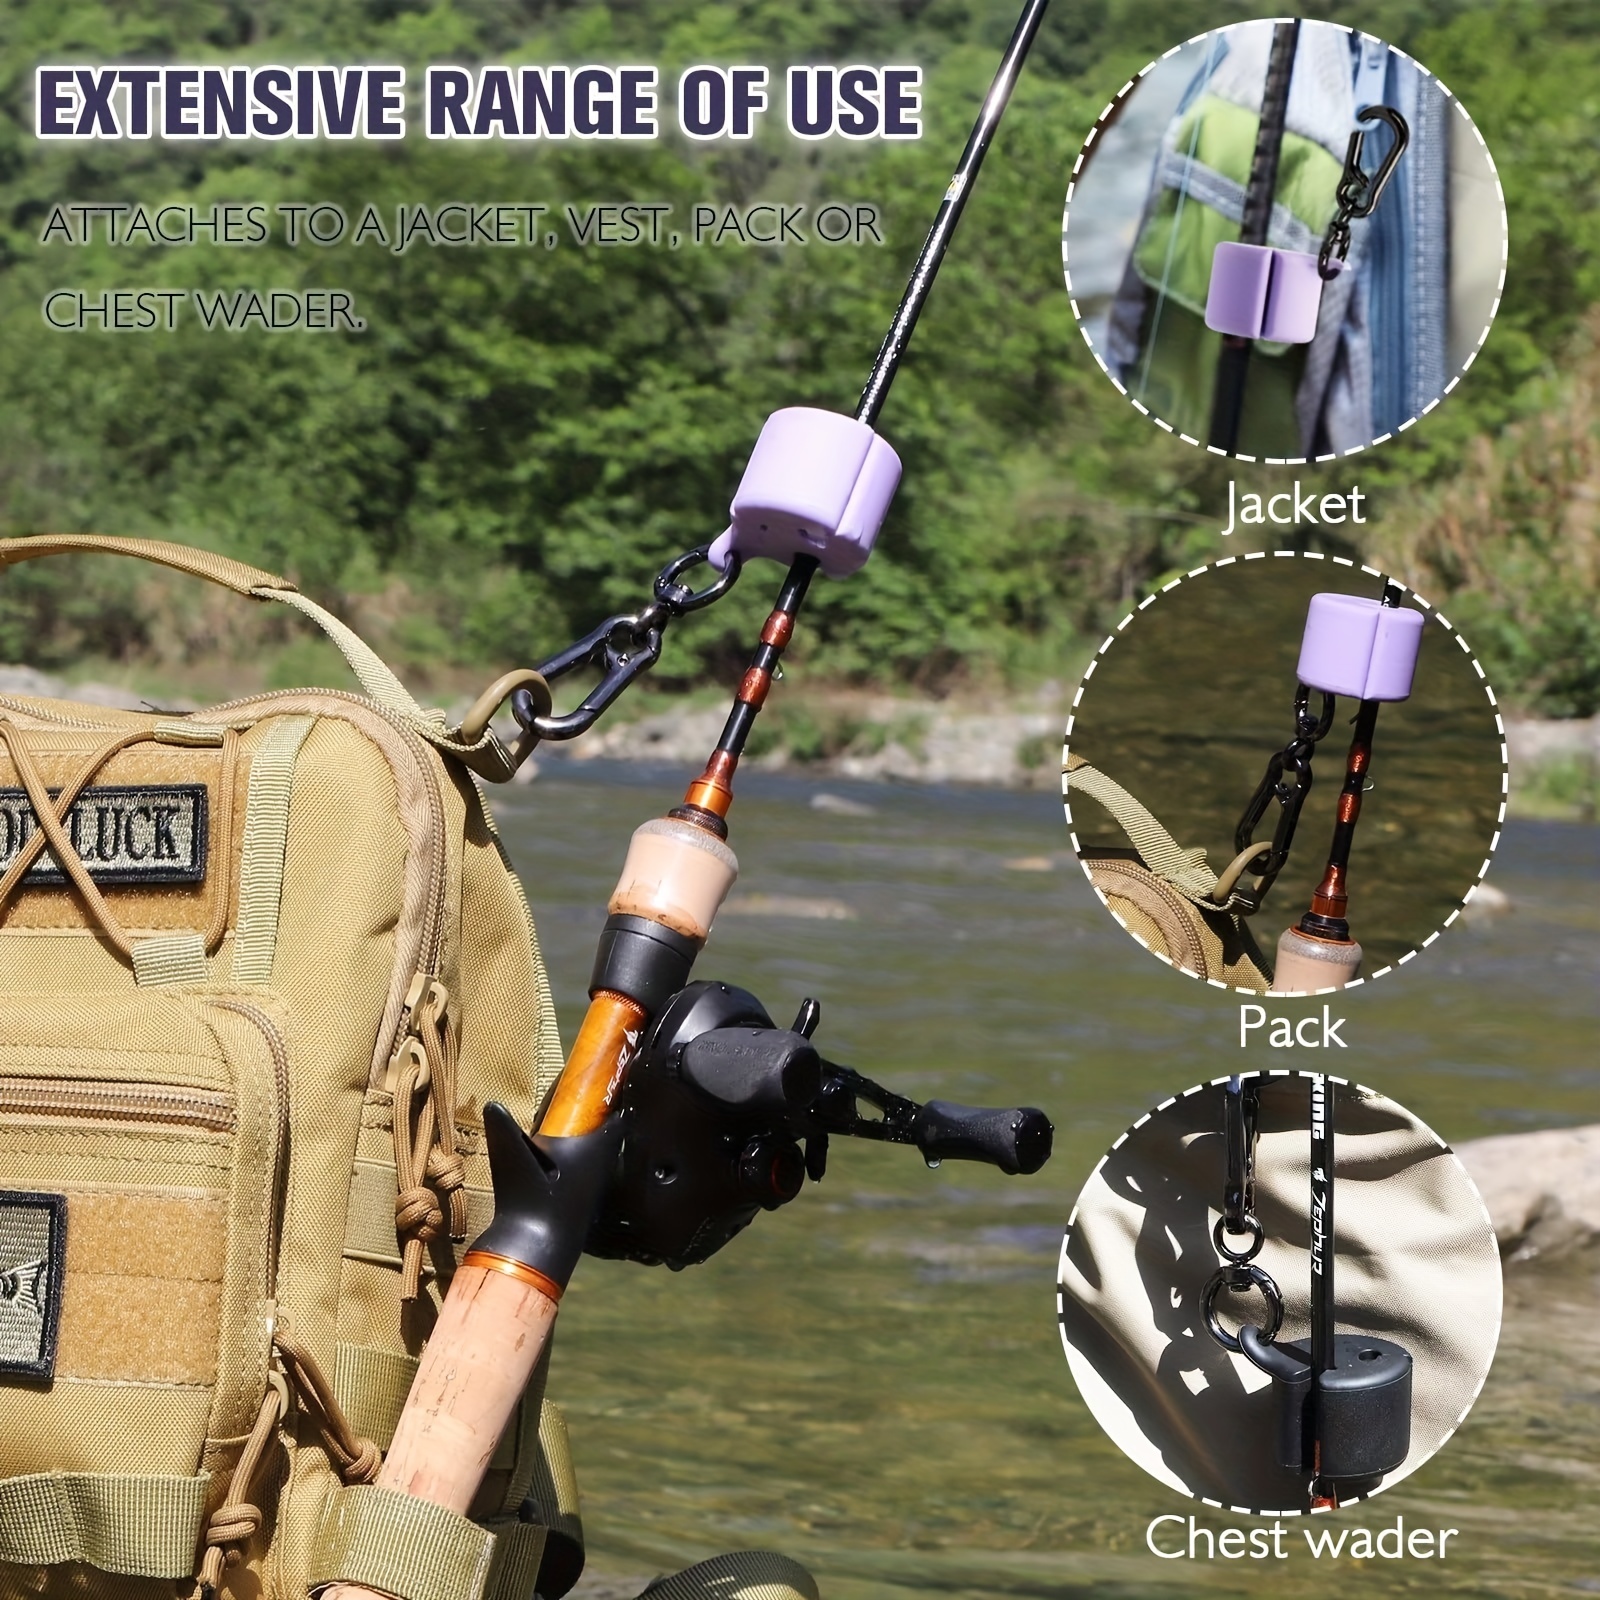 Dovesun Fishing Rod Holder Straps Fly Fishing Accessories Fishing Tackle  Ties Silicone Stretchy Rod Holder 2pcs